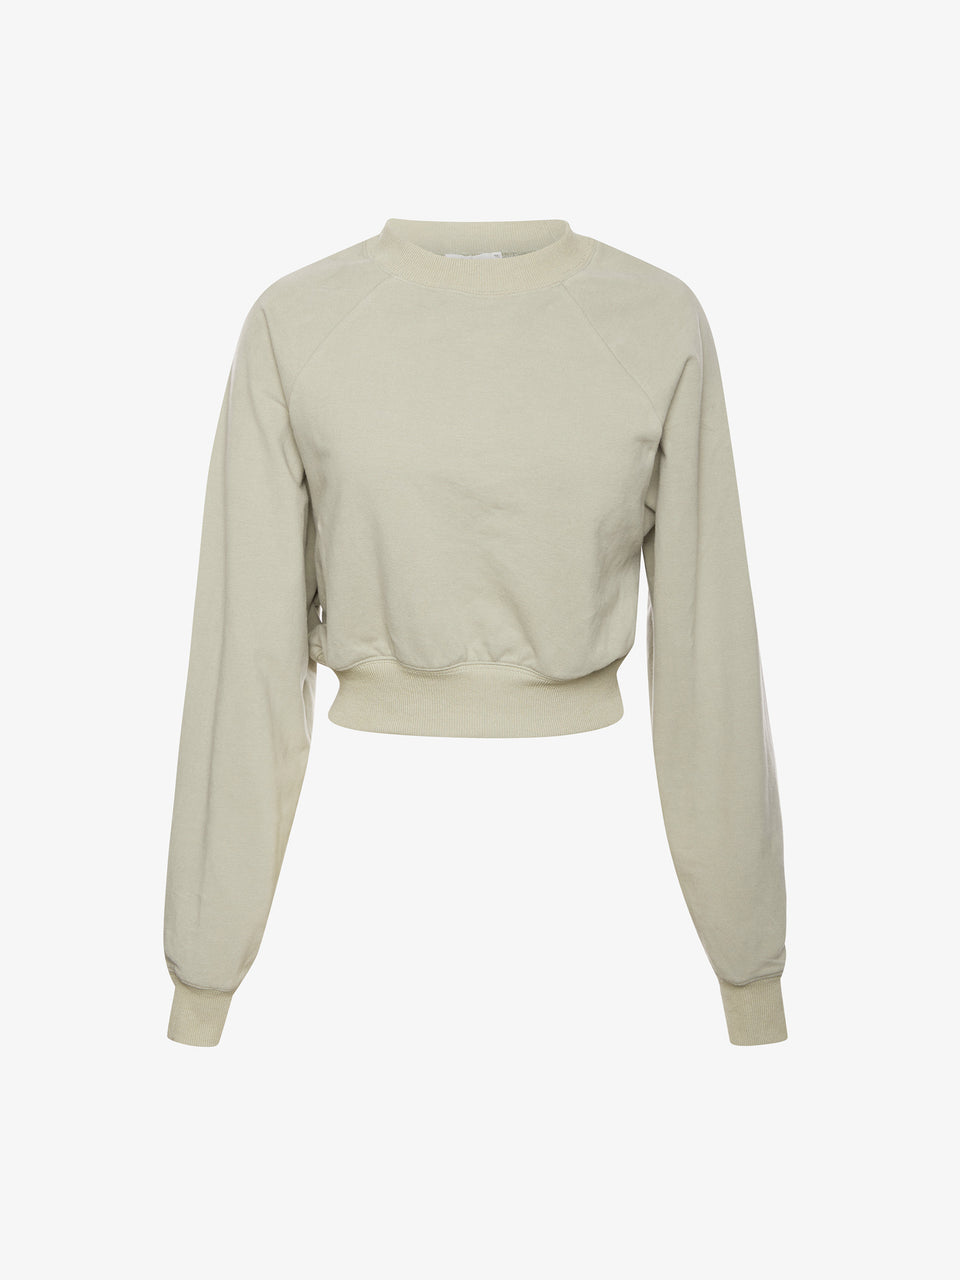 NIA_Krissy_Cropped_Pullover_Sage_Green